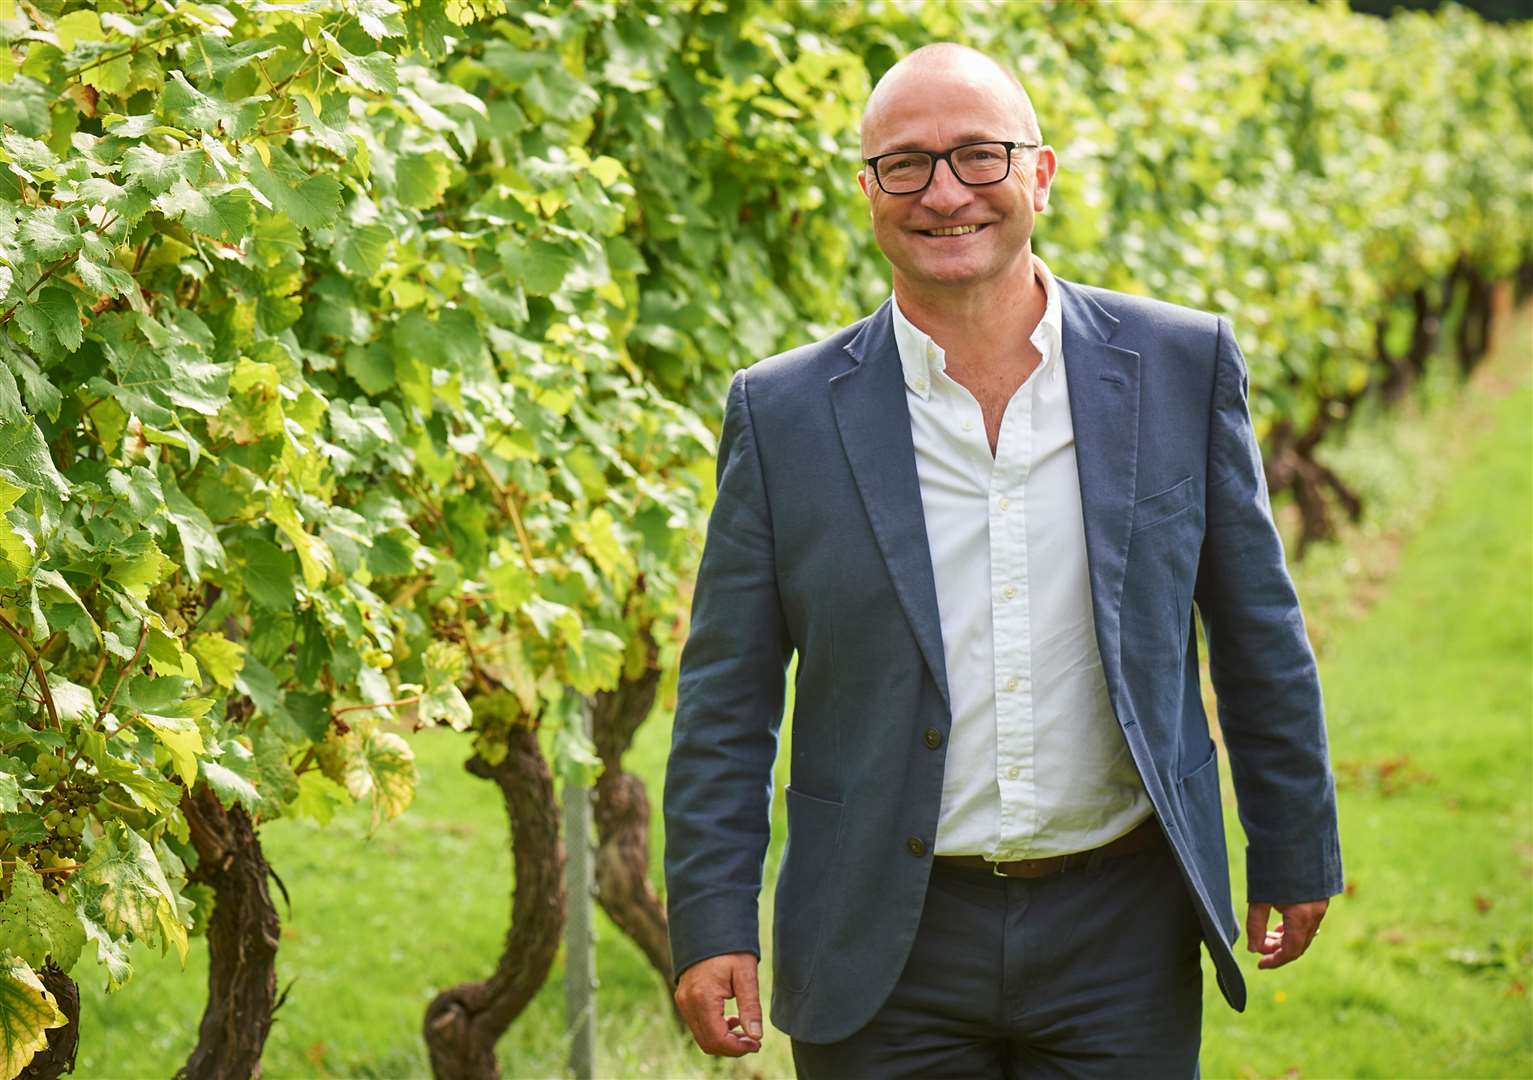 Chapel Down CEO Andrew Carter says Kent can be celebrated as a ‘world-class wine region’